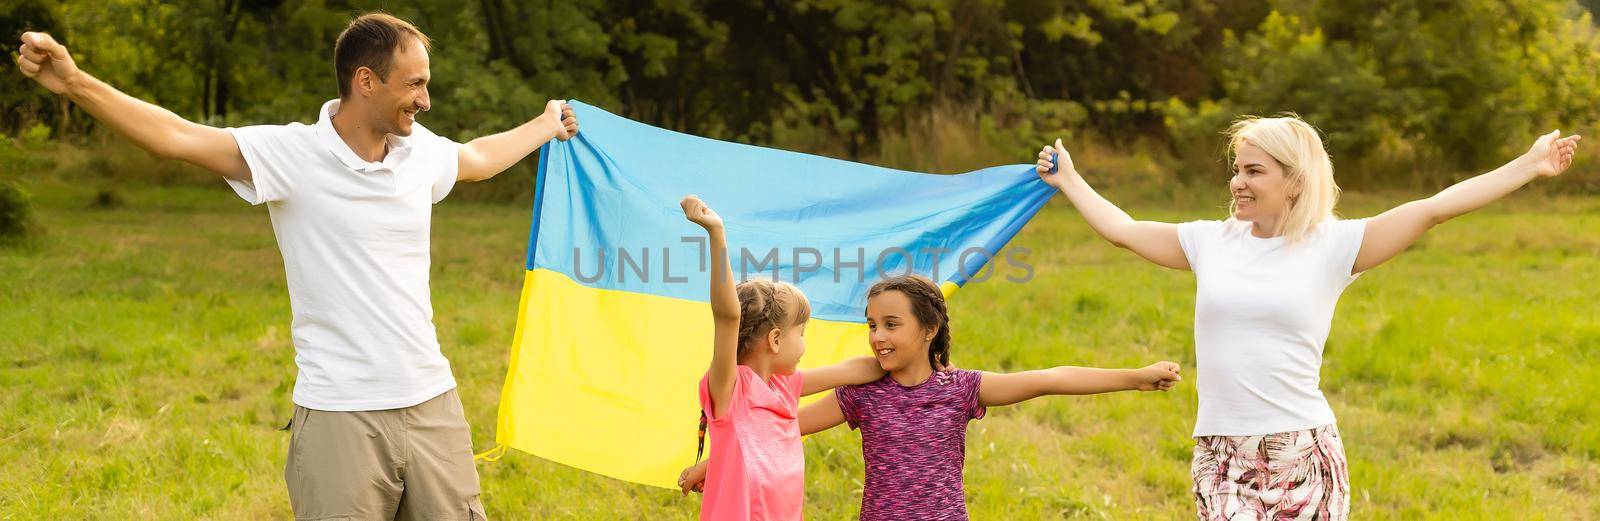 Flag Ukraine in hands of little girl in field. Child carries fluttering blue and yellow flag of Ukraine against background field. by Andelov13